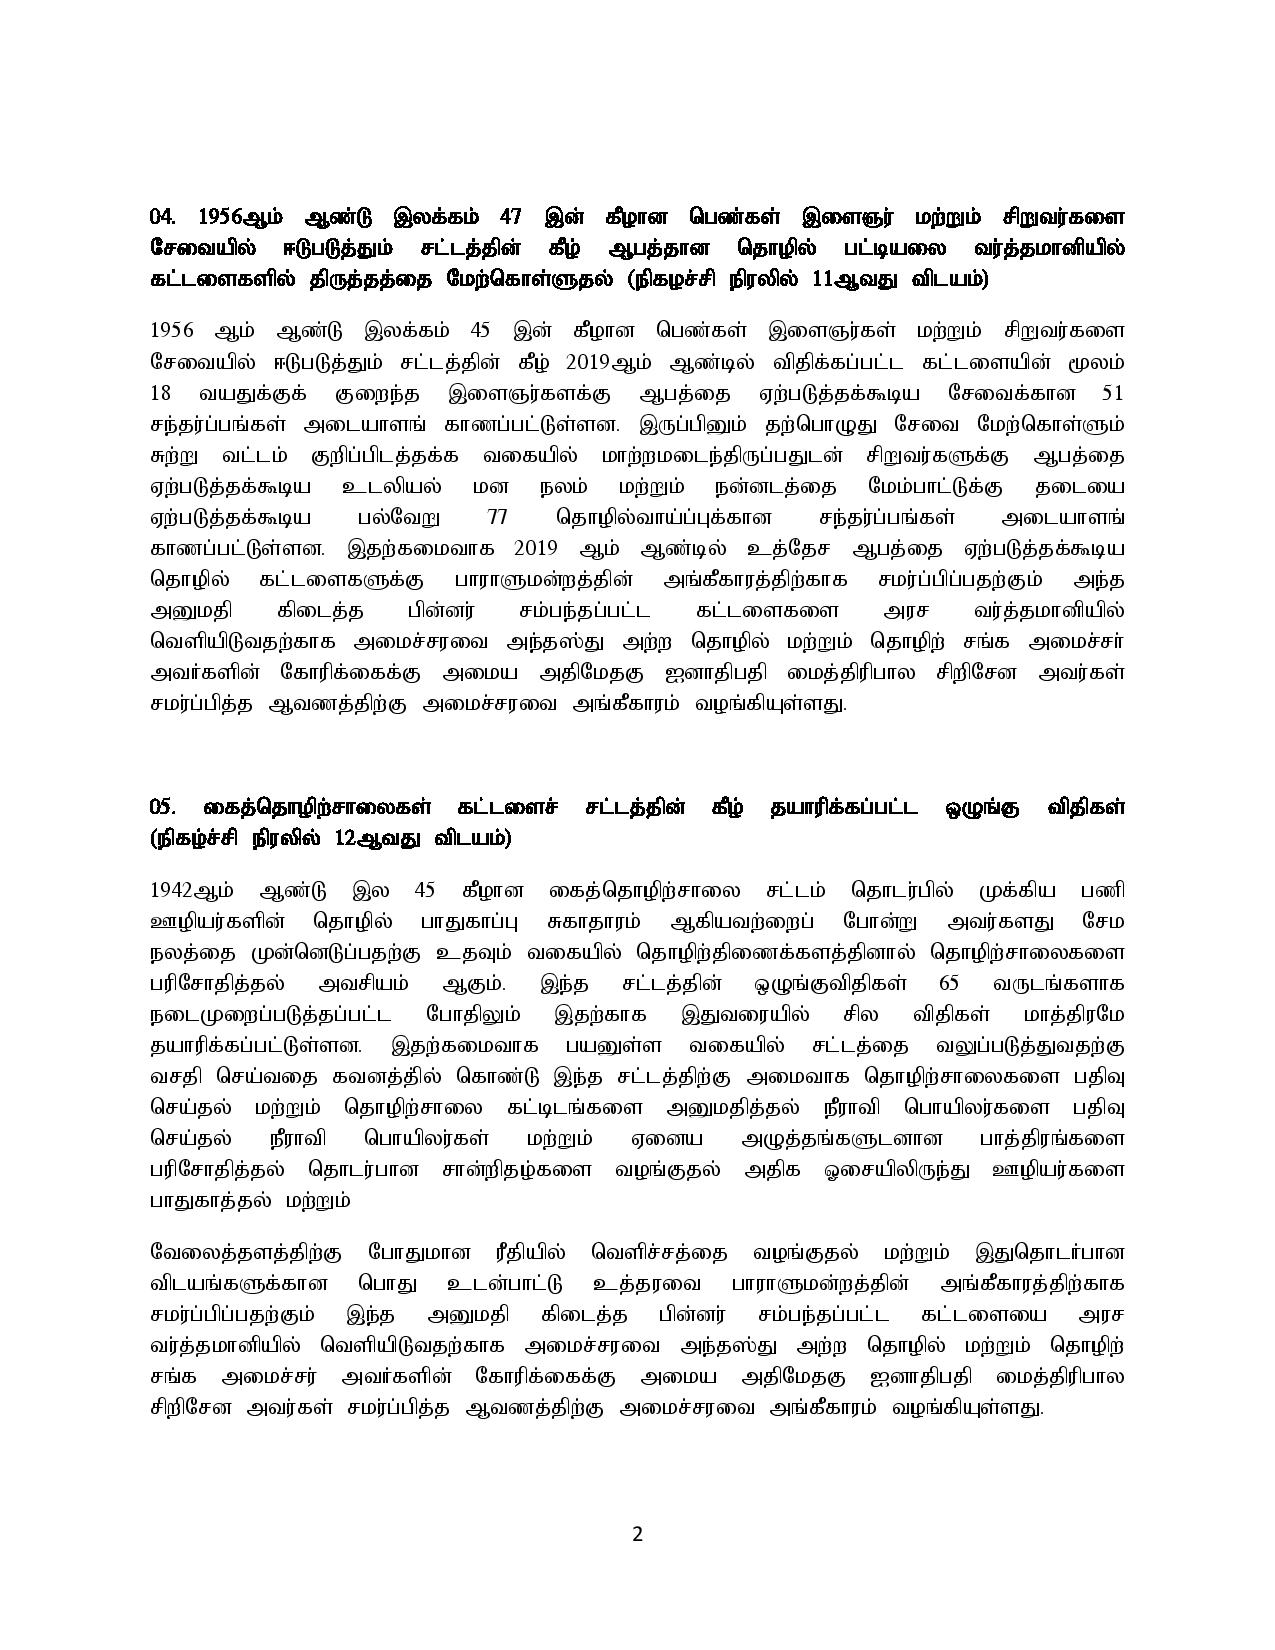 cabinet decision Tamil 19.07.2019 page 002